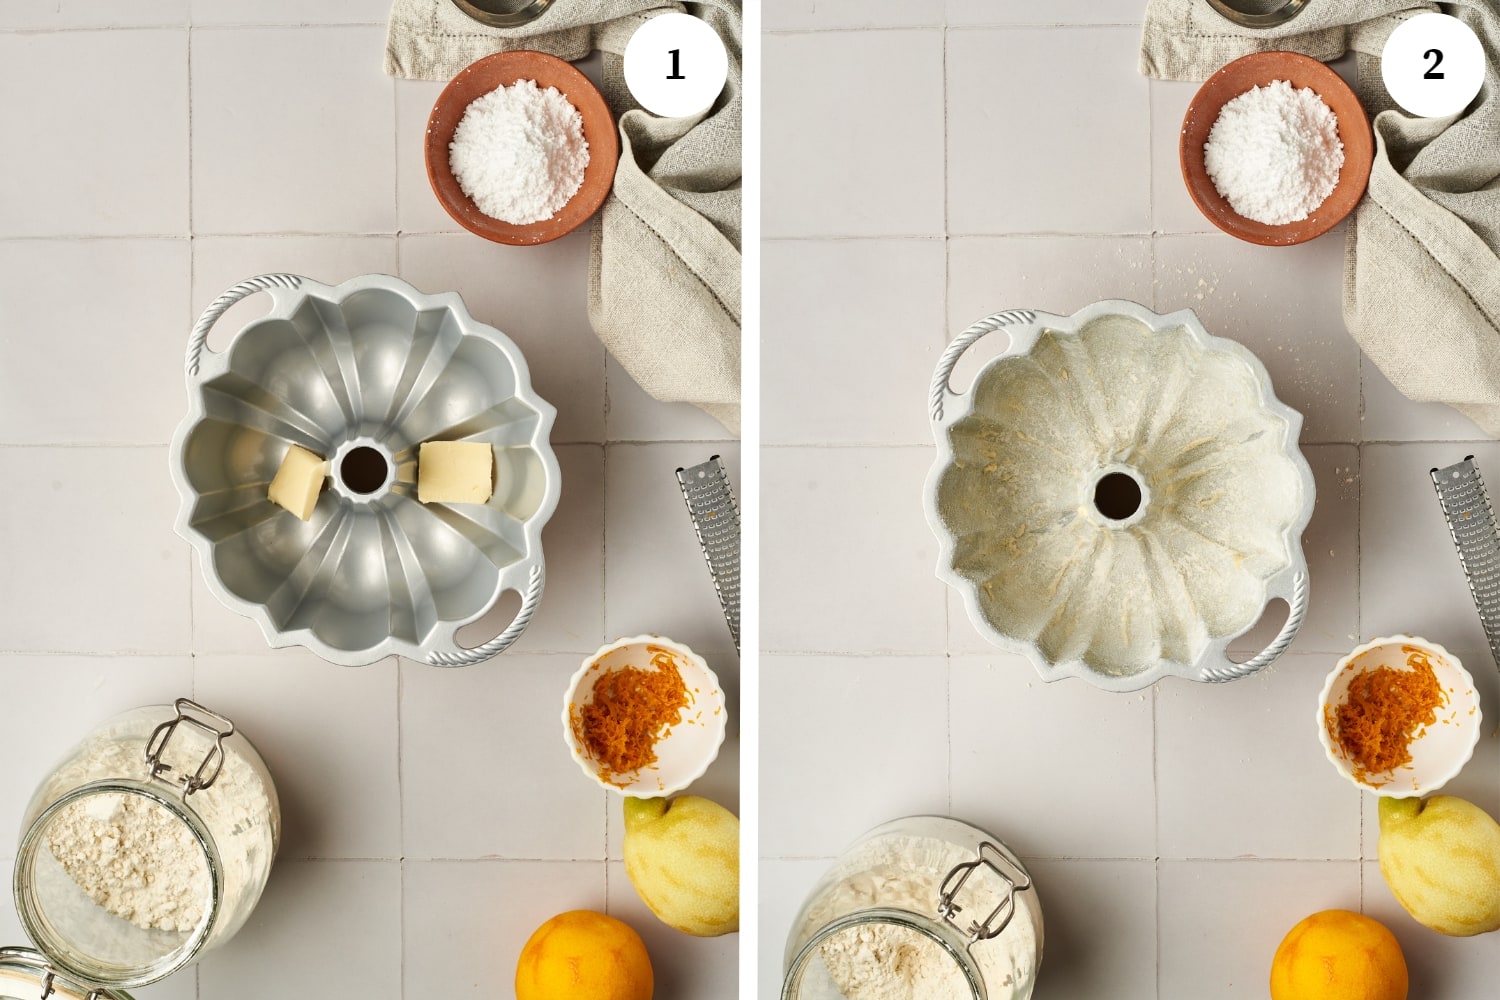 first photo is a bundt pan with 2 cubes of butter inside. second photo is a bundt pan dusted with flour. both photos have a bowl of powdered sugar, prange zest, zester, and a jar of flour around the pan.